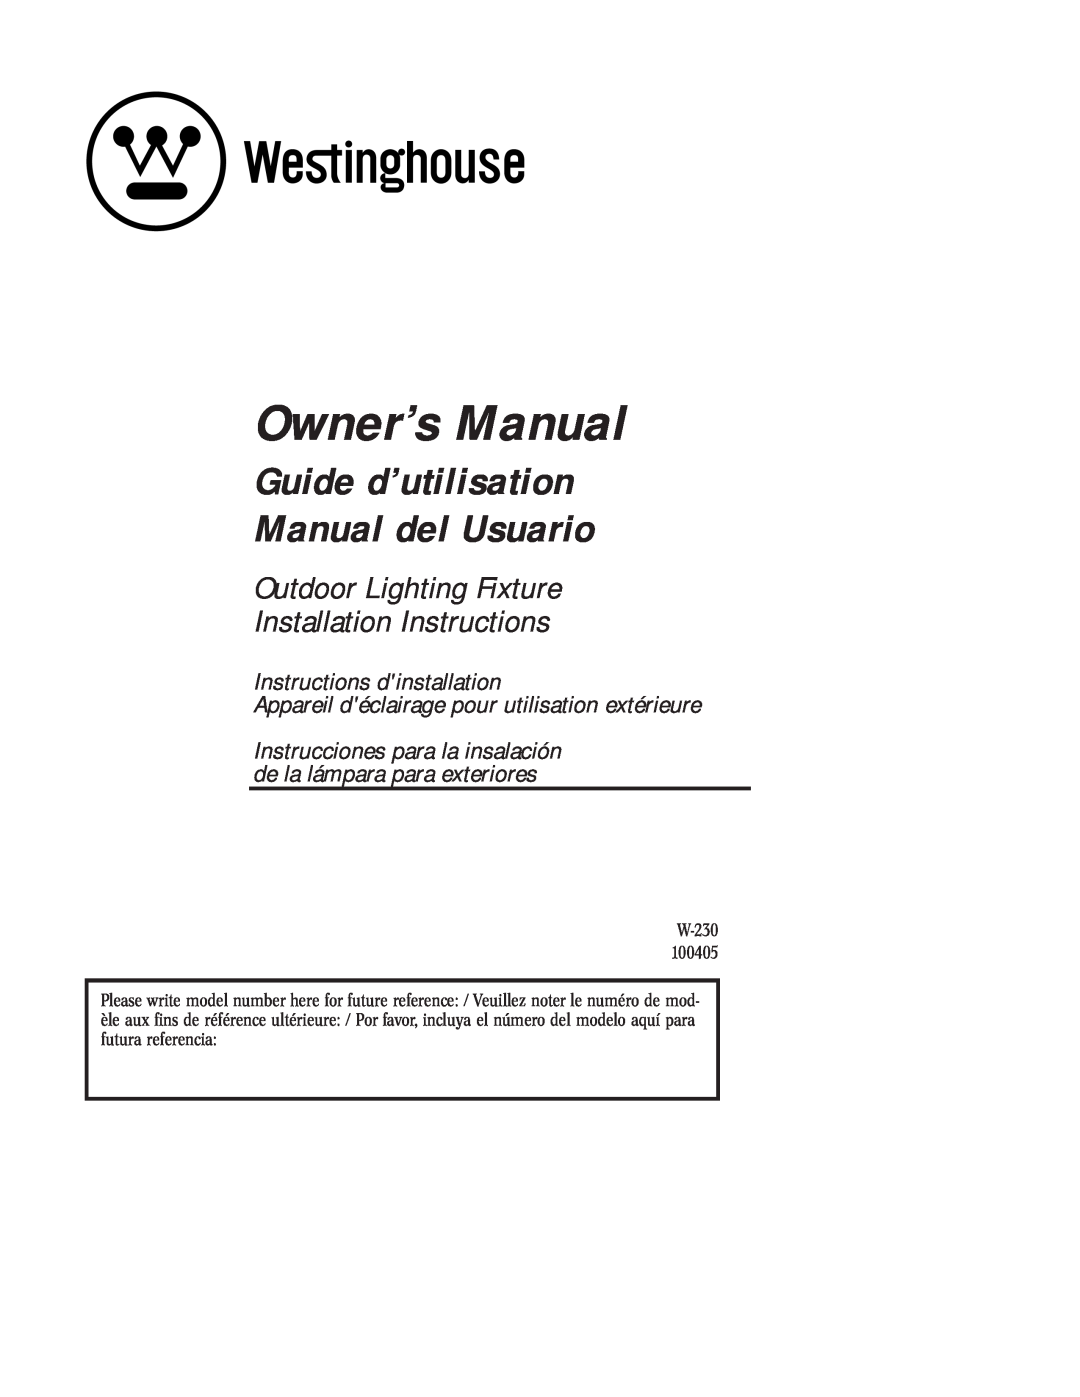 Westinghouse W-230 owner manual Owner’s Manual, Guide d’utilisation Manual del Usuario, Instructions dinstallation 